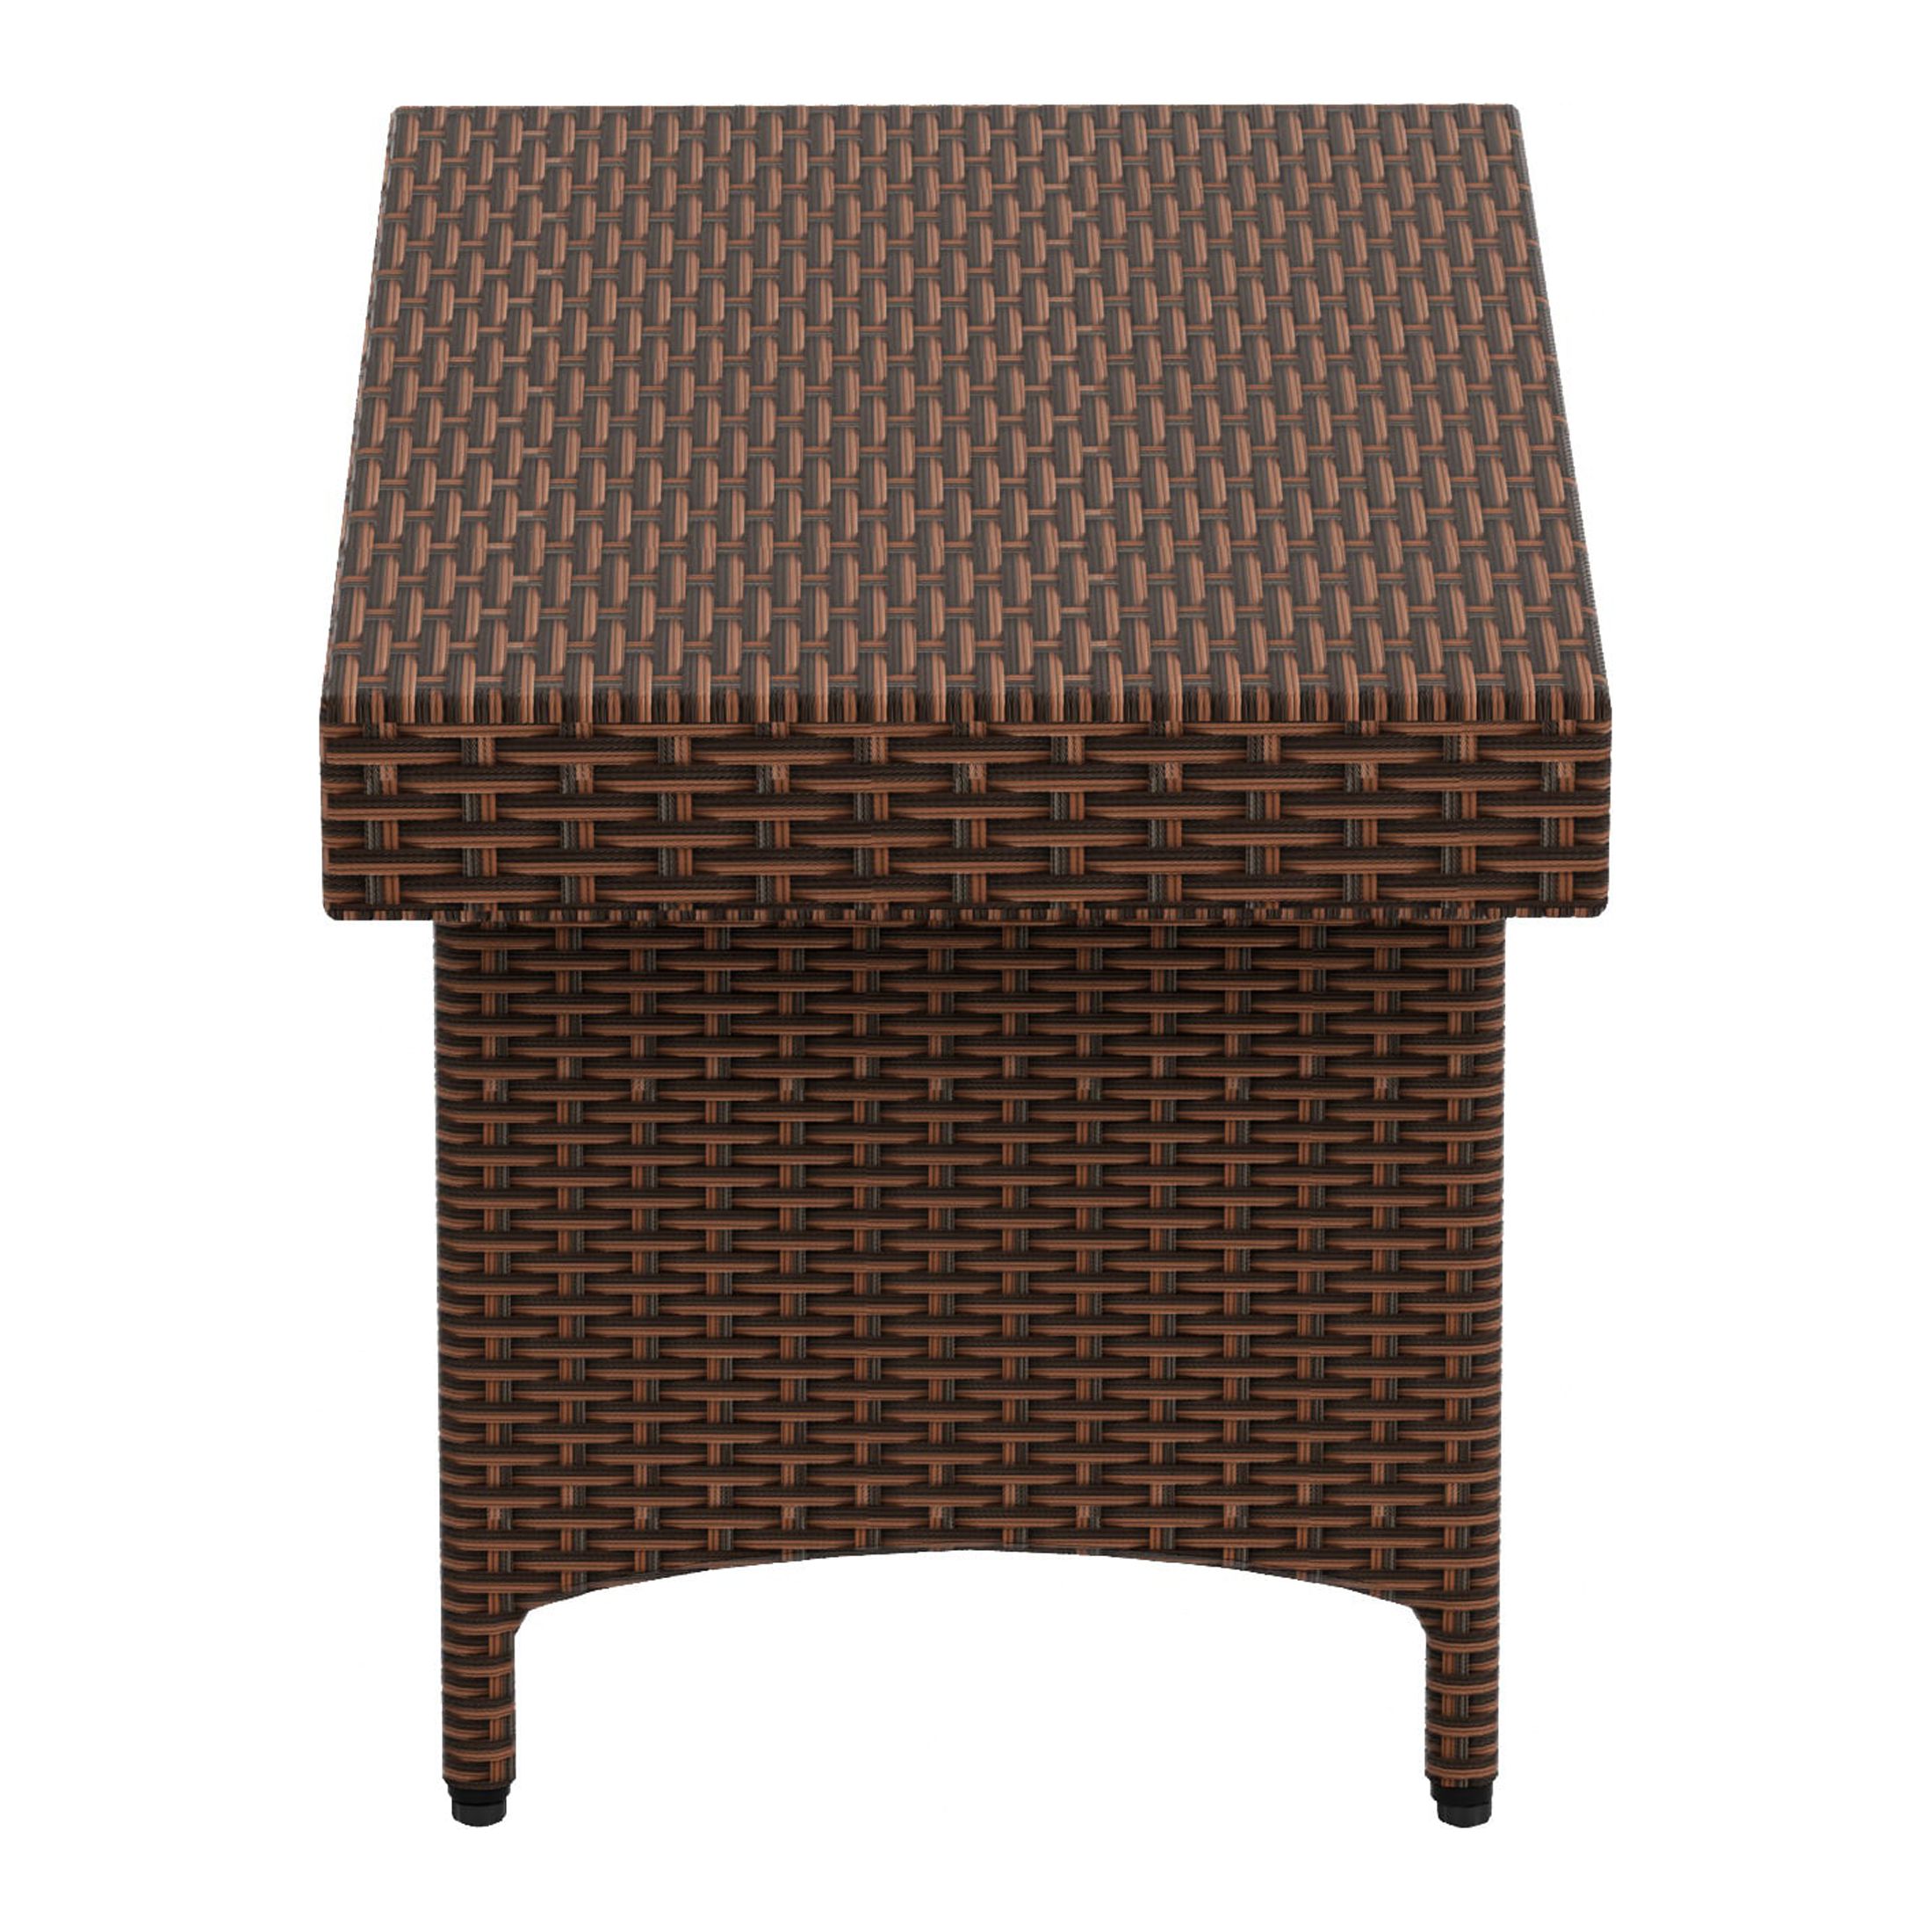 WestinTrends Coastal Outdoor Folding Side Table, 23" x 15" All Weather PE Rattan Wicker Small Patio Table Portable Picnic Table, Brown - image 4 of 7